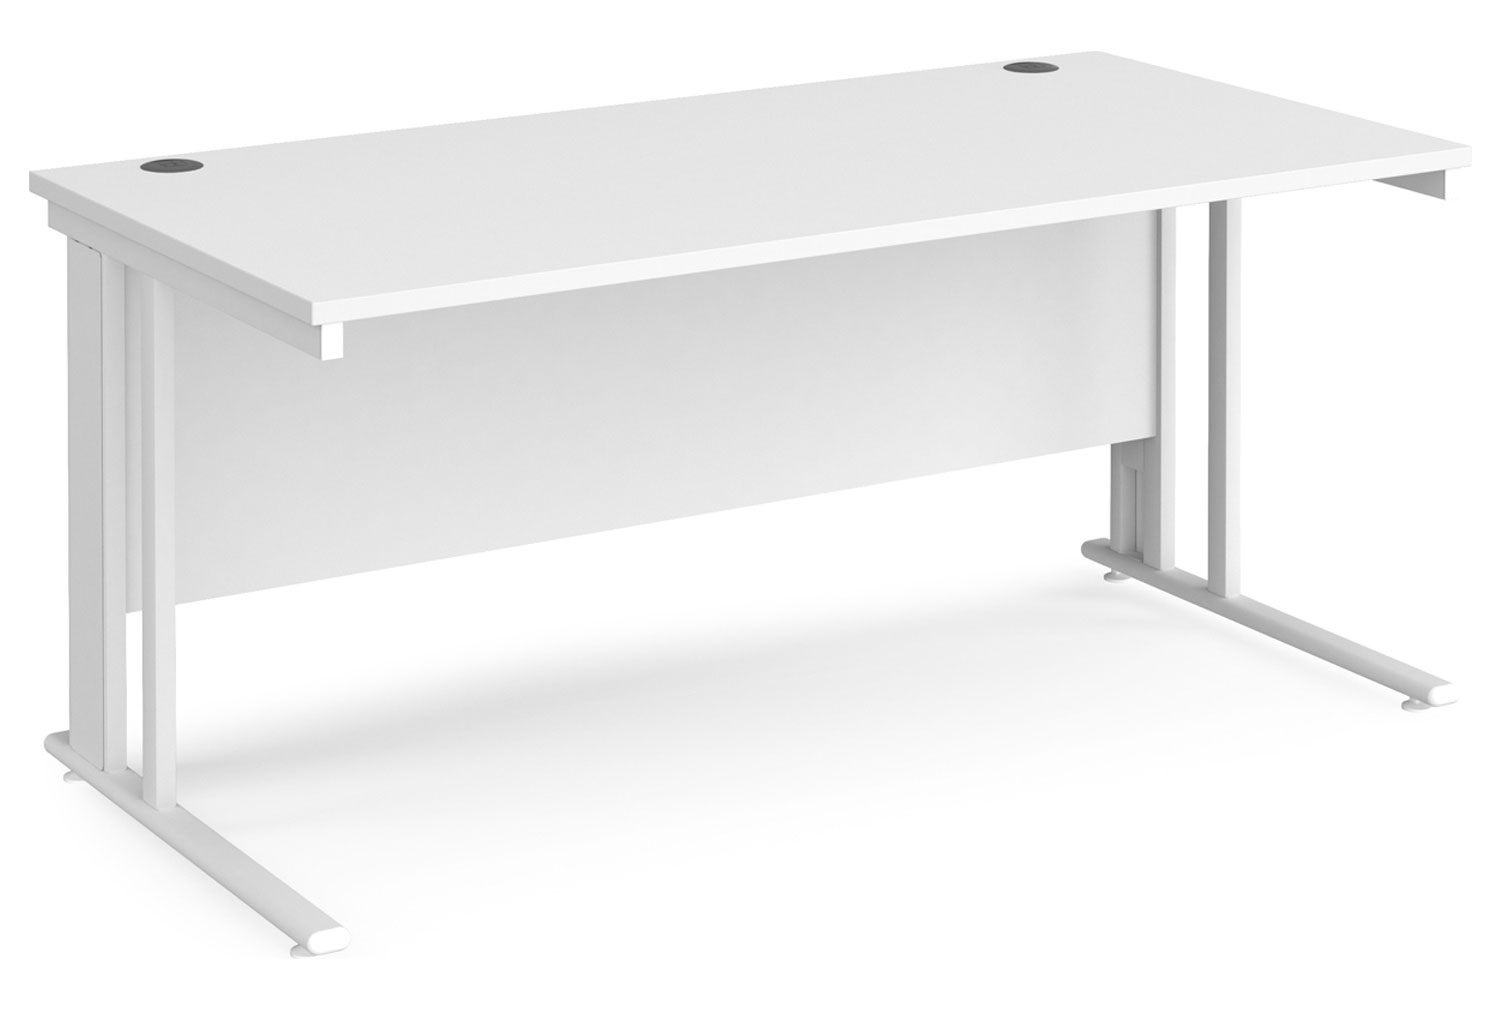 Value Line Deluxe Cable Managed Rectangular Office Desk (White Legs), 160wx80dx73h (cm), White